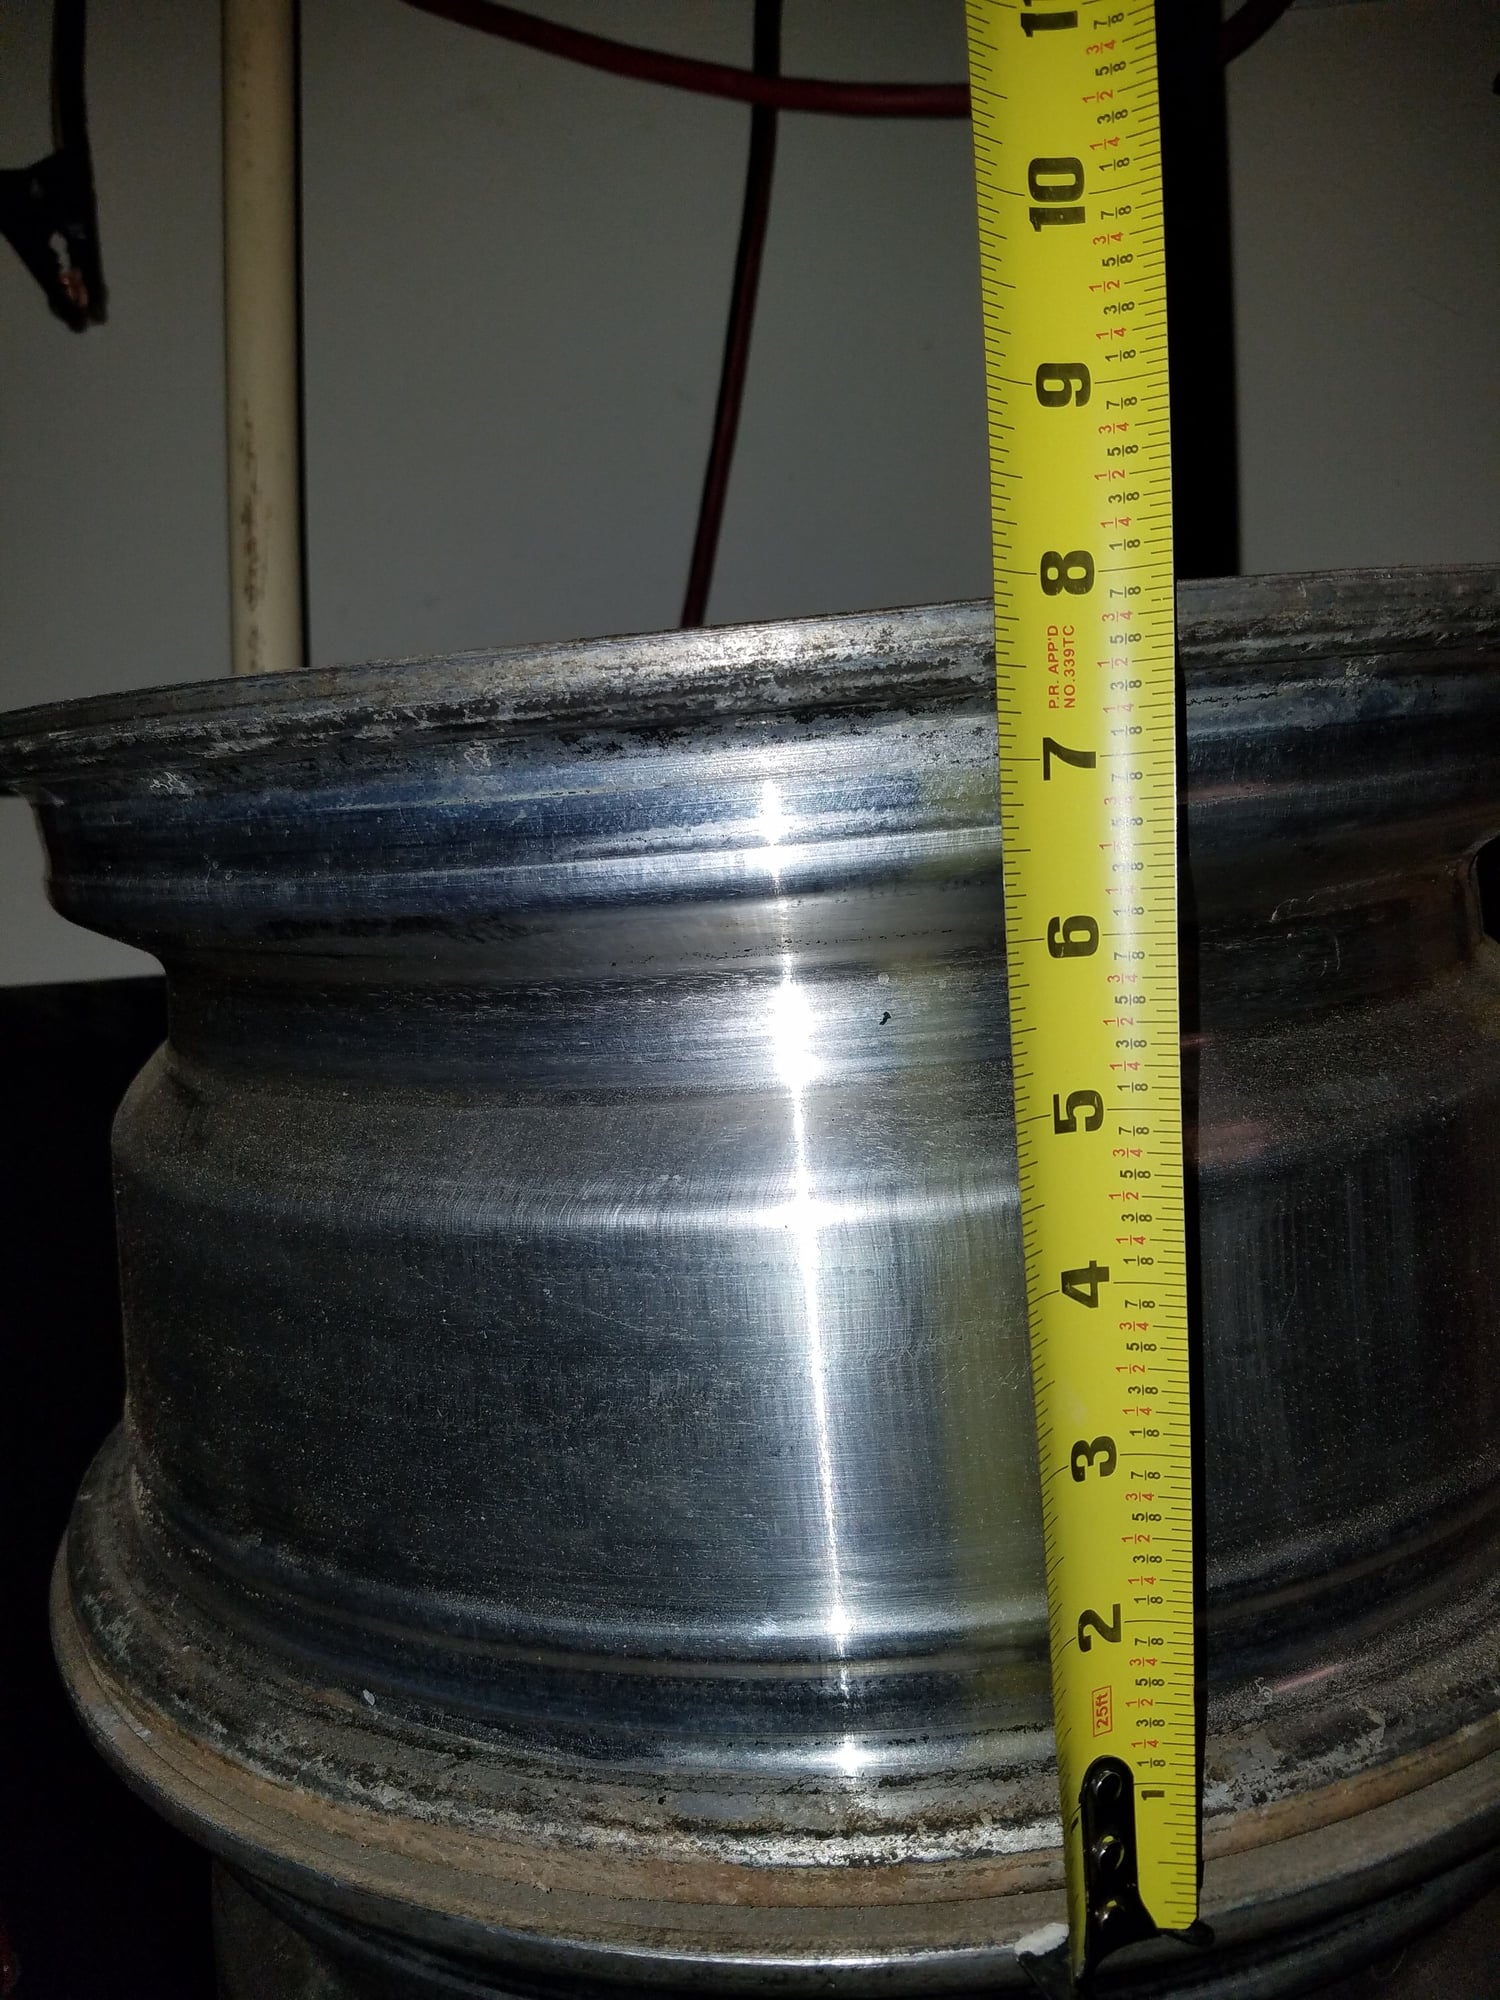 Wheels and Tires/Axles - Hurricane Cyclone wheels - Used - 1967 to 1996 Ford F-150 - Groton, CT 06340, United States